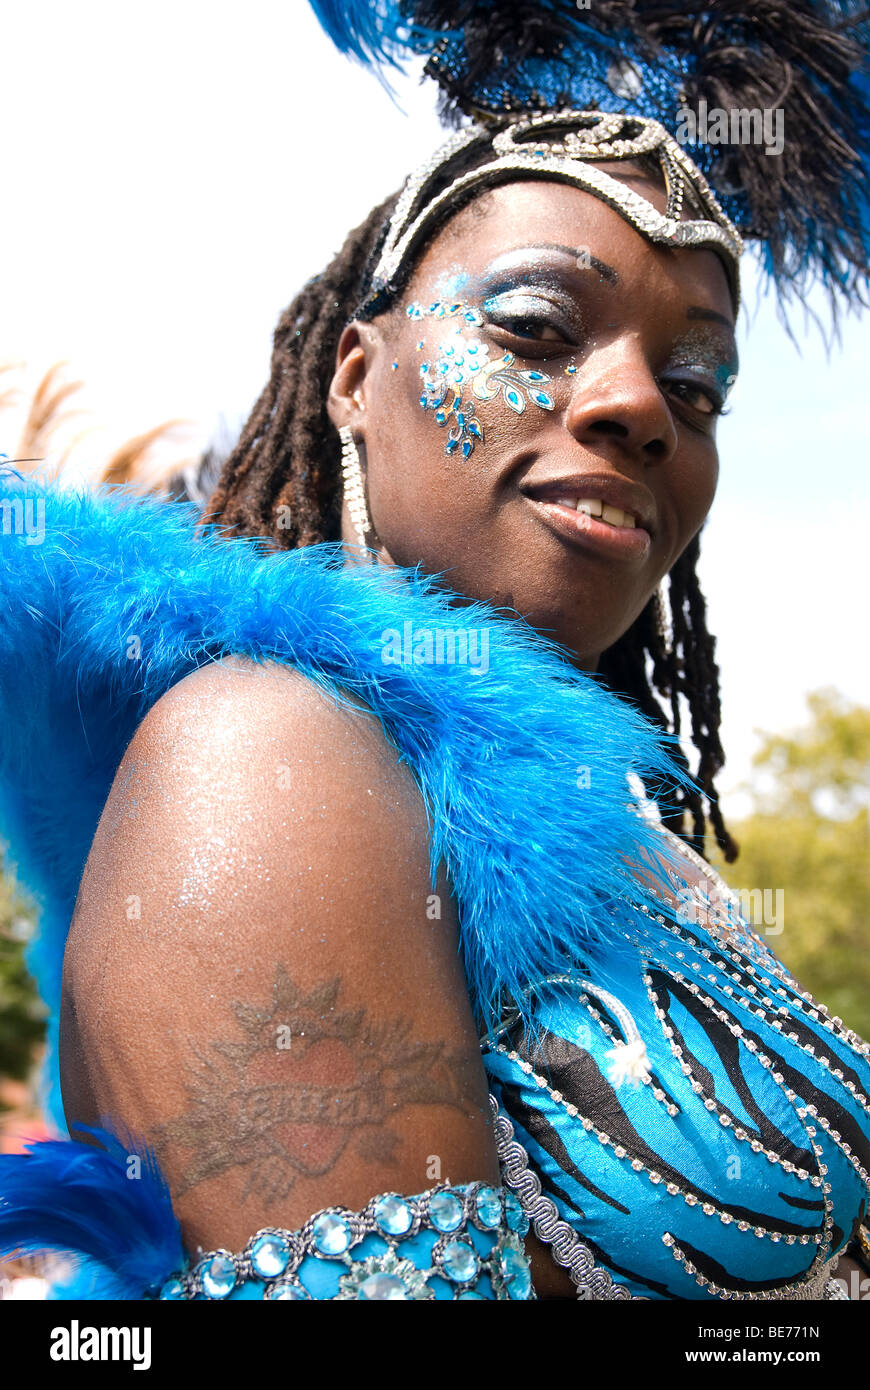 DIY CARNIVAL WIRE BRA !, LABOR DAY / WEST INDIAN PARADE, CARNIVAL SERIES